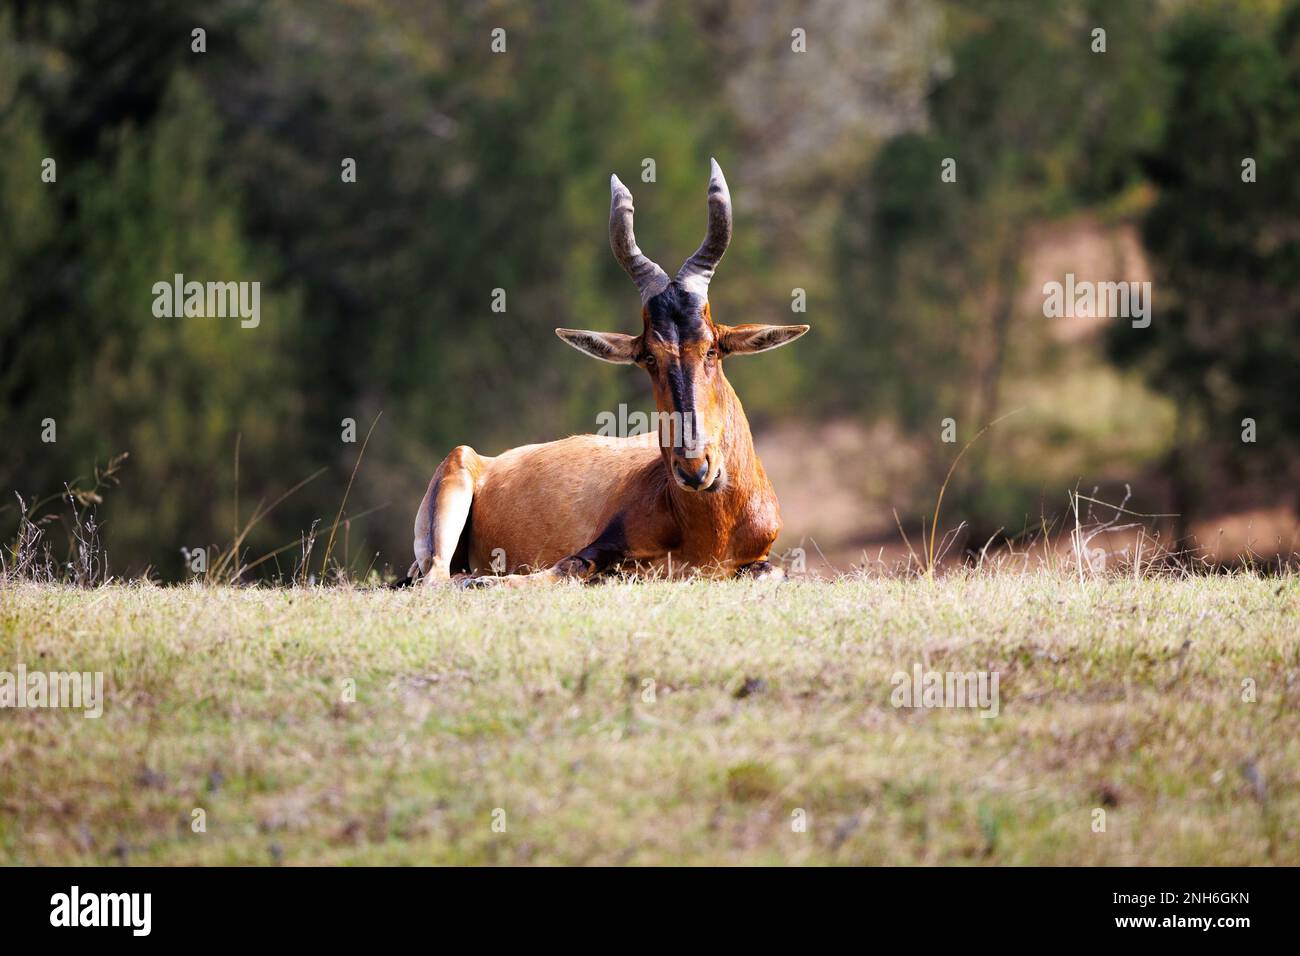 The Common Eland stares directly at the camera while laying down on a grassy field in South Africa. Stock Photo